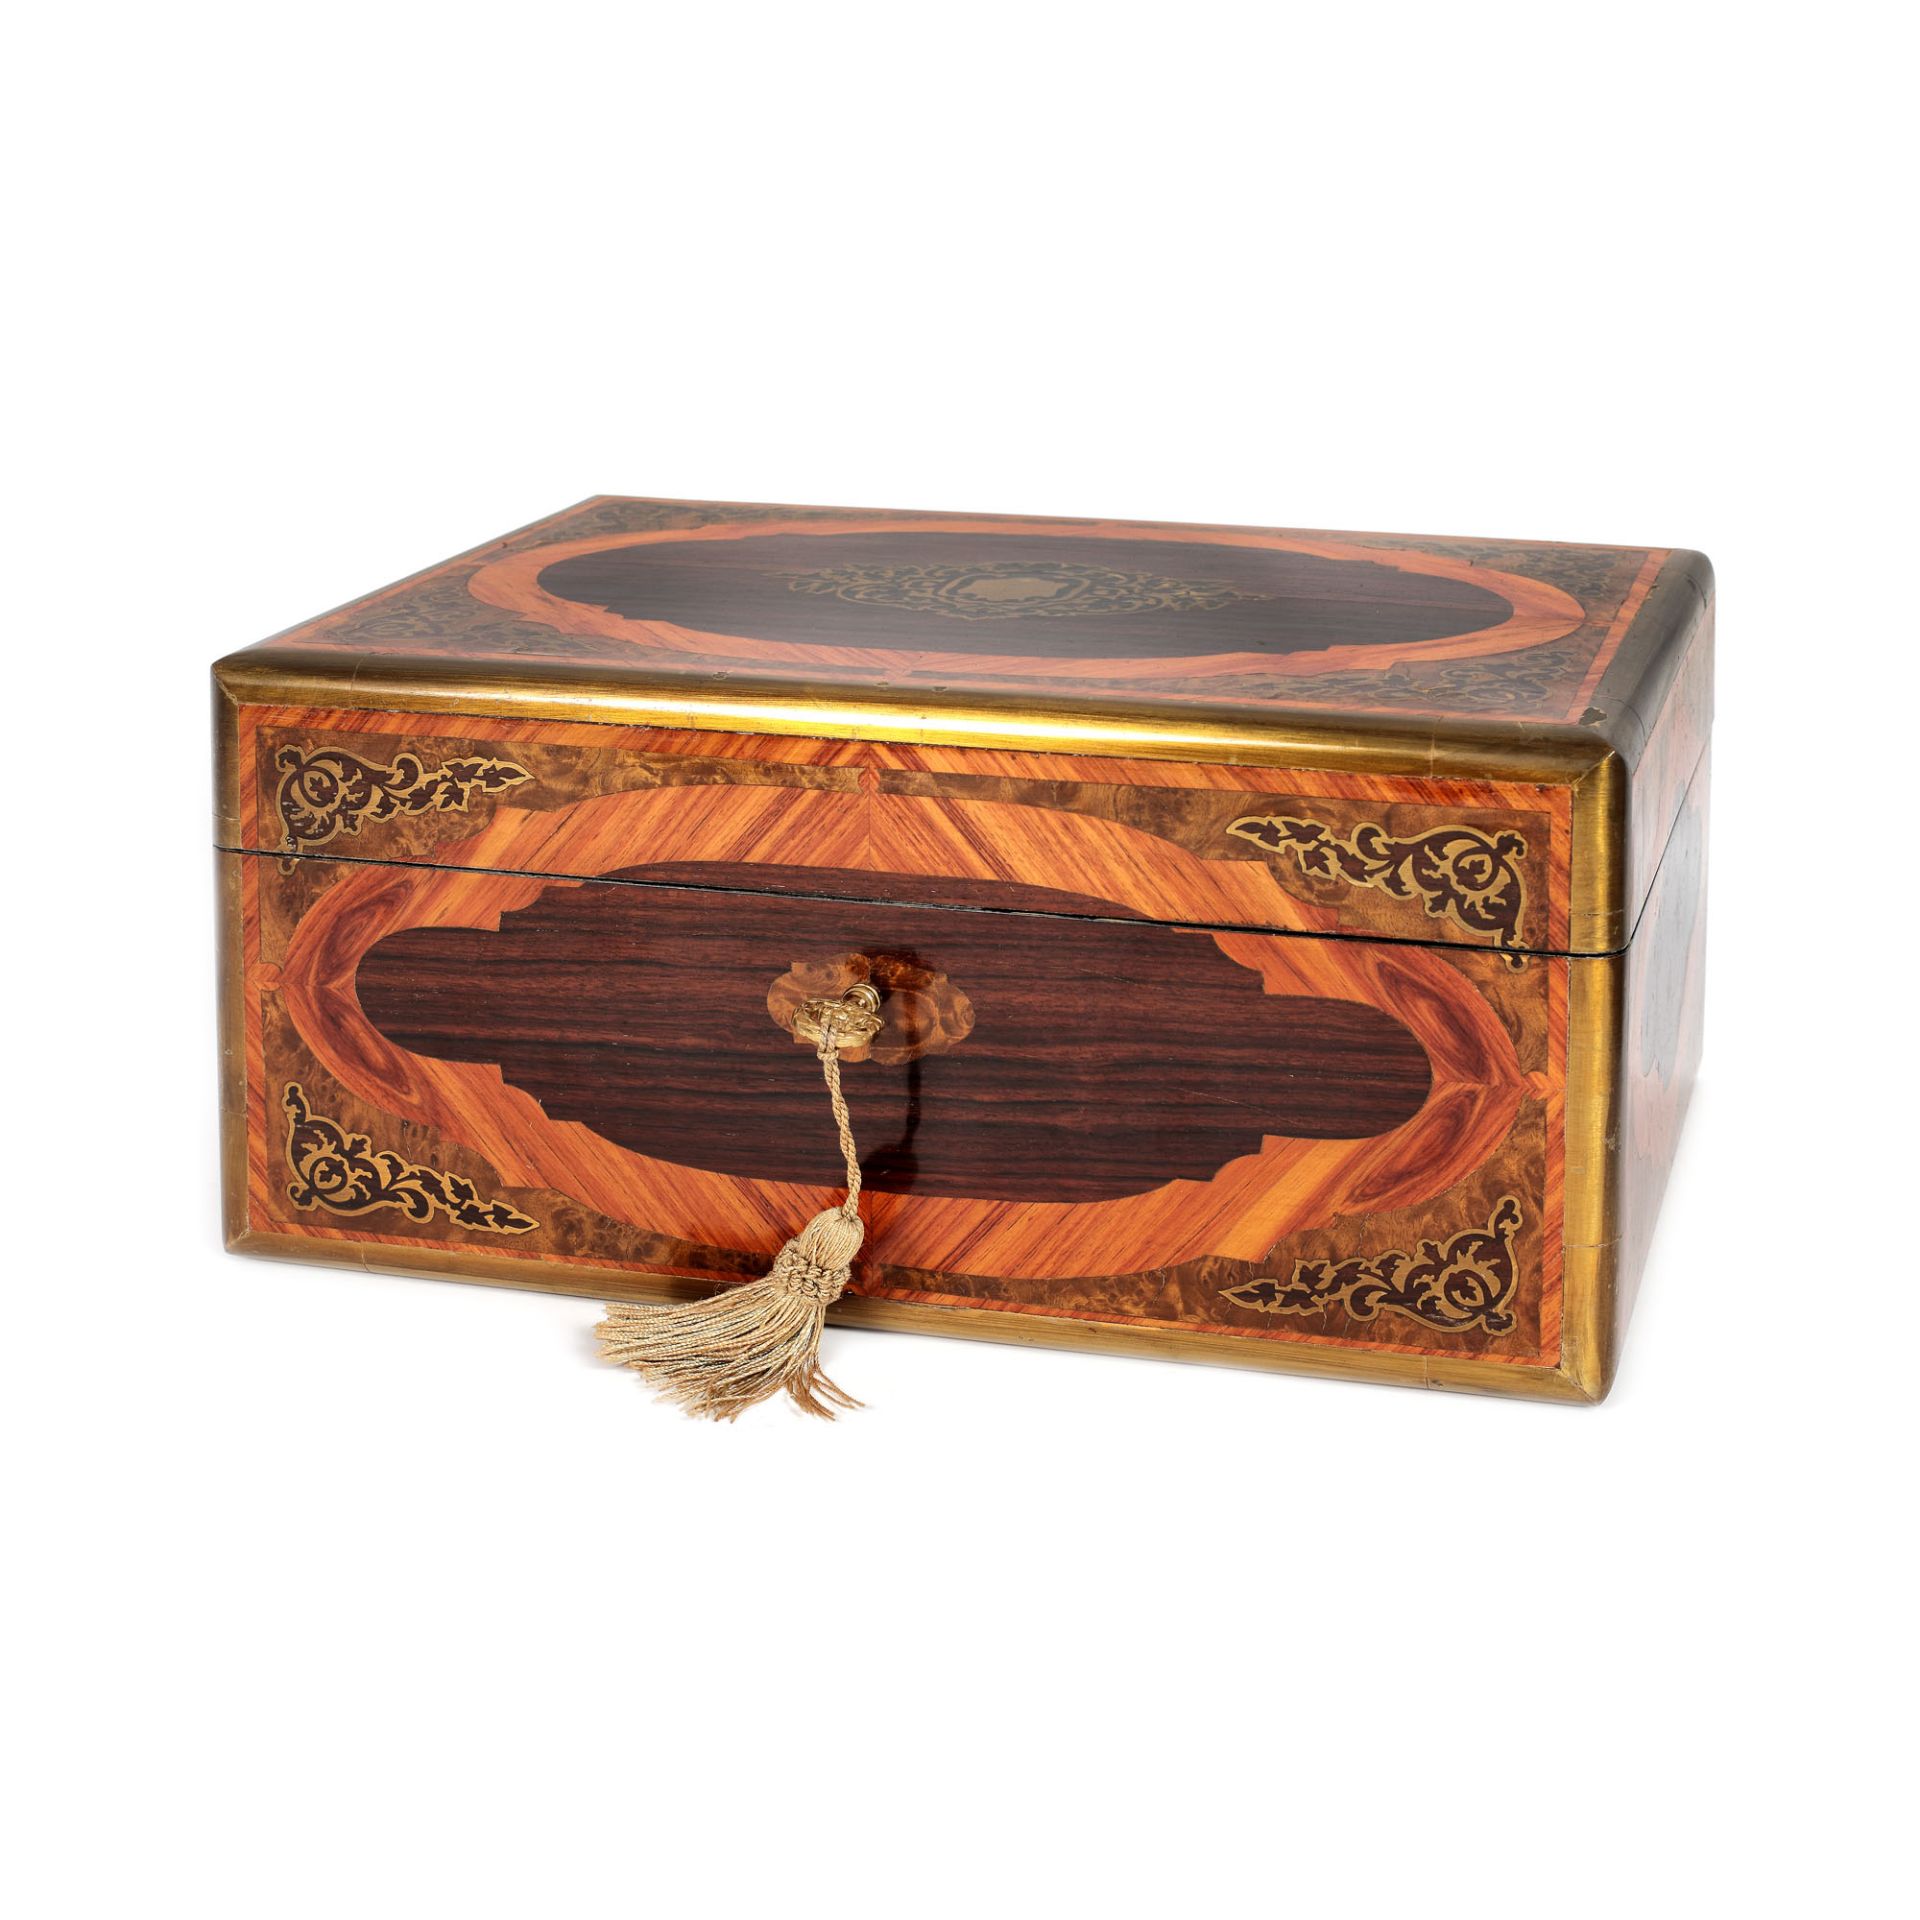 French workshop, Napoleon III wooden box, for jewellery, decorated with marquetry, late 19th century